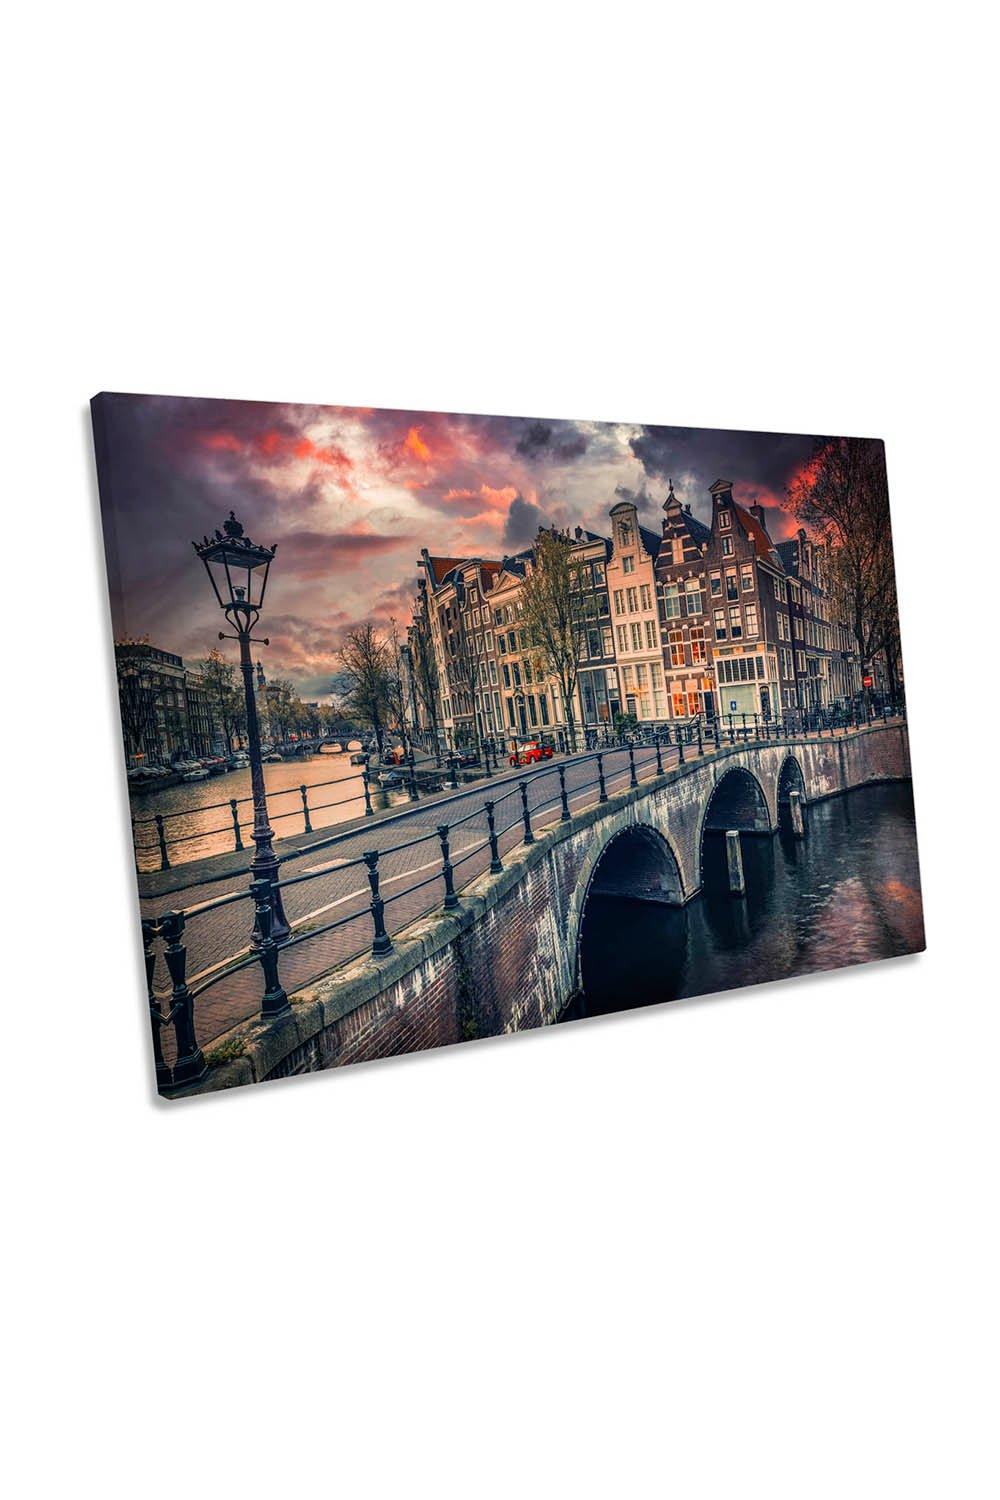 Amsterdam City Street View Canvas Wall Art Picture Print